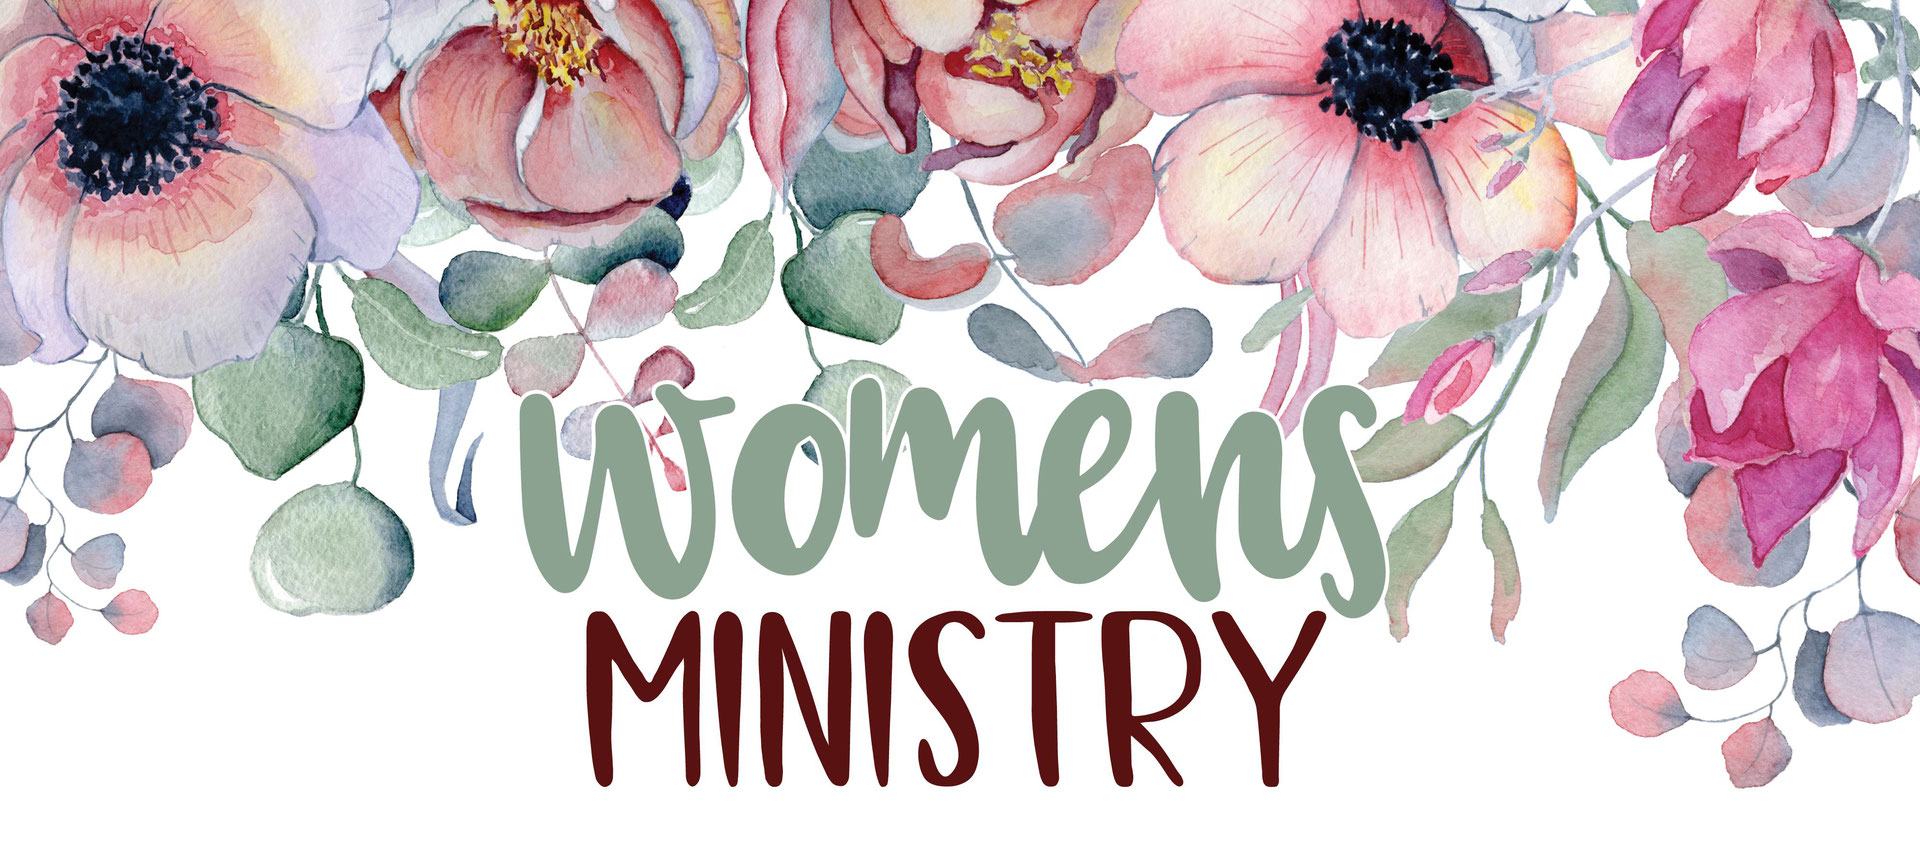 What Is The Purpose Of Women's Ministries?